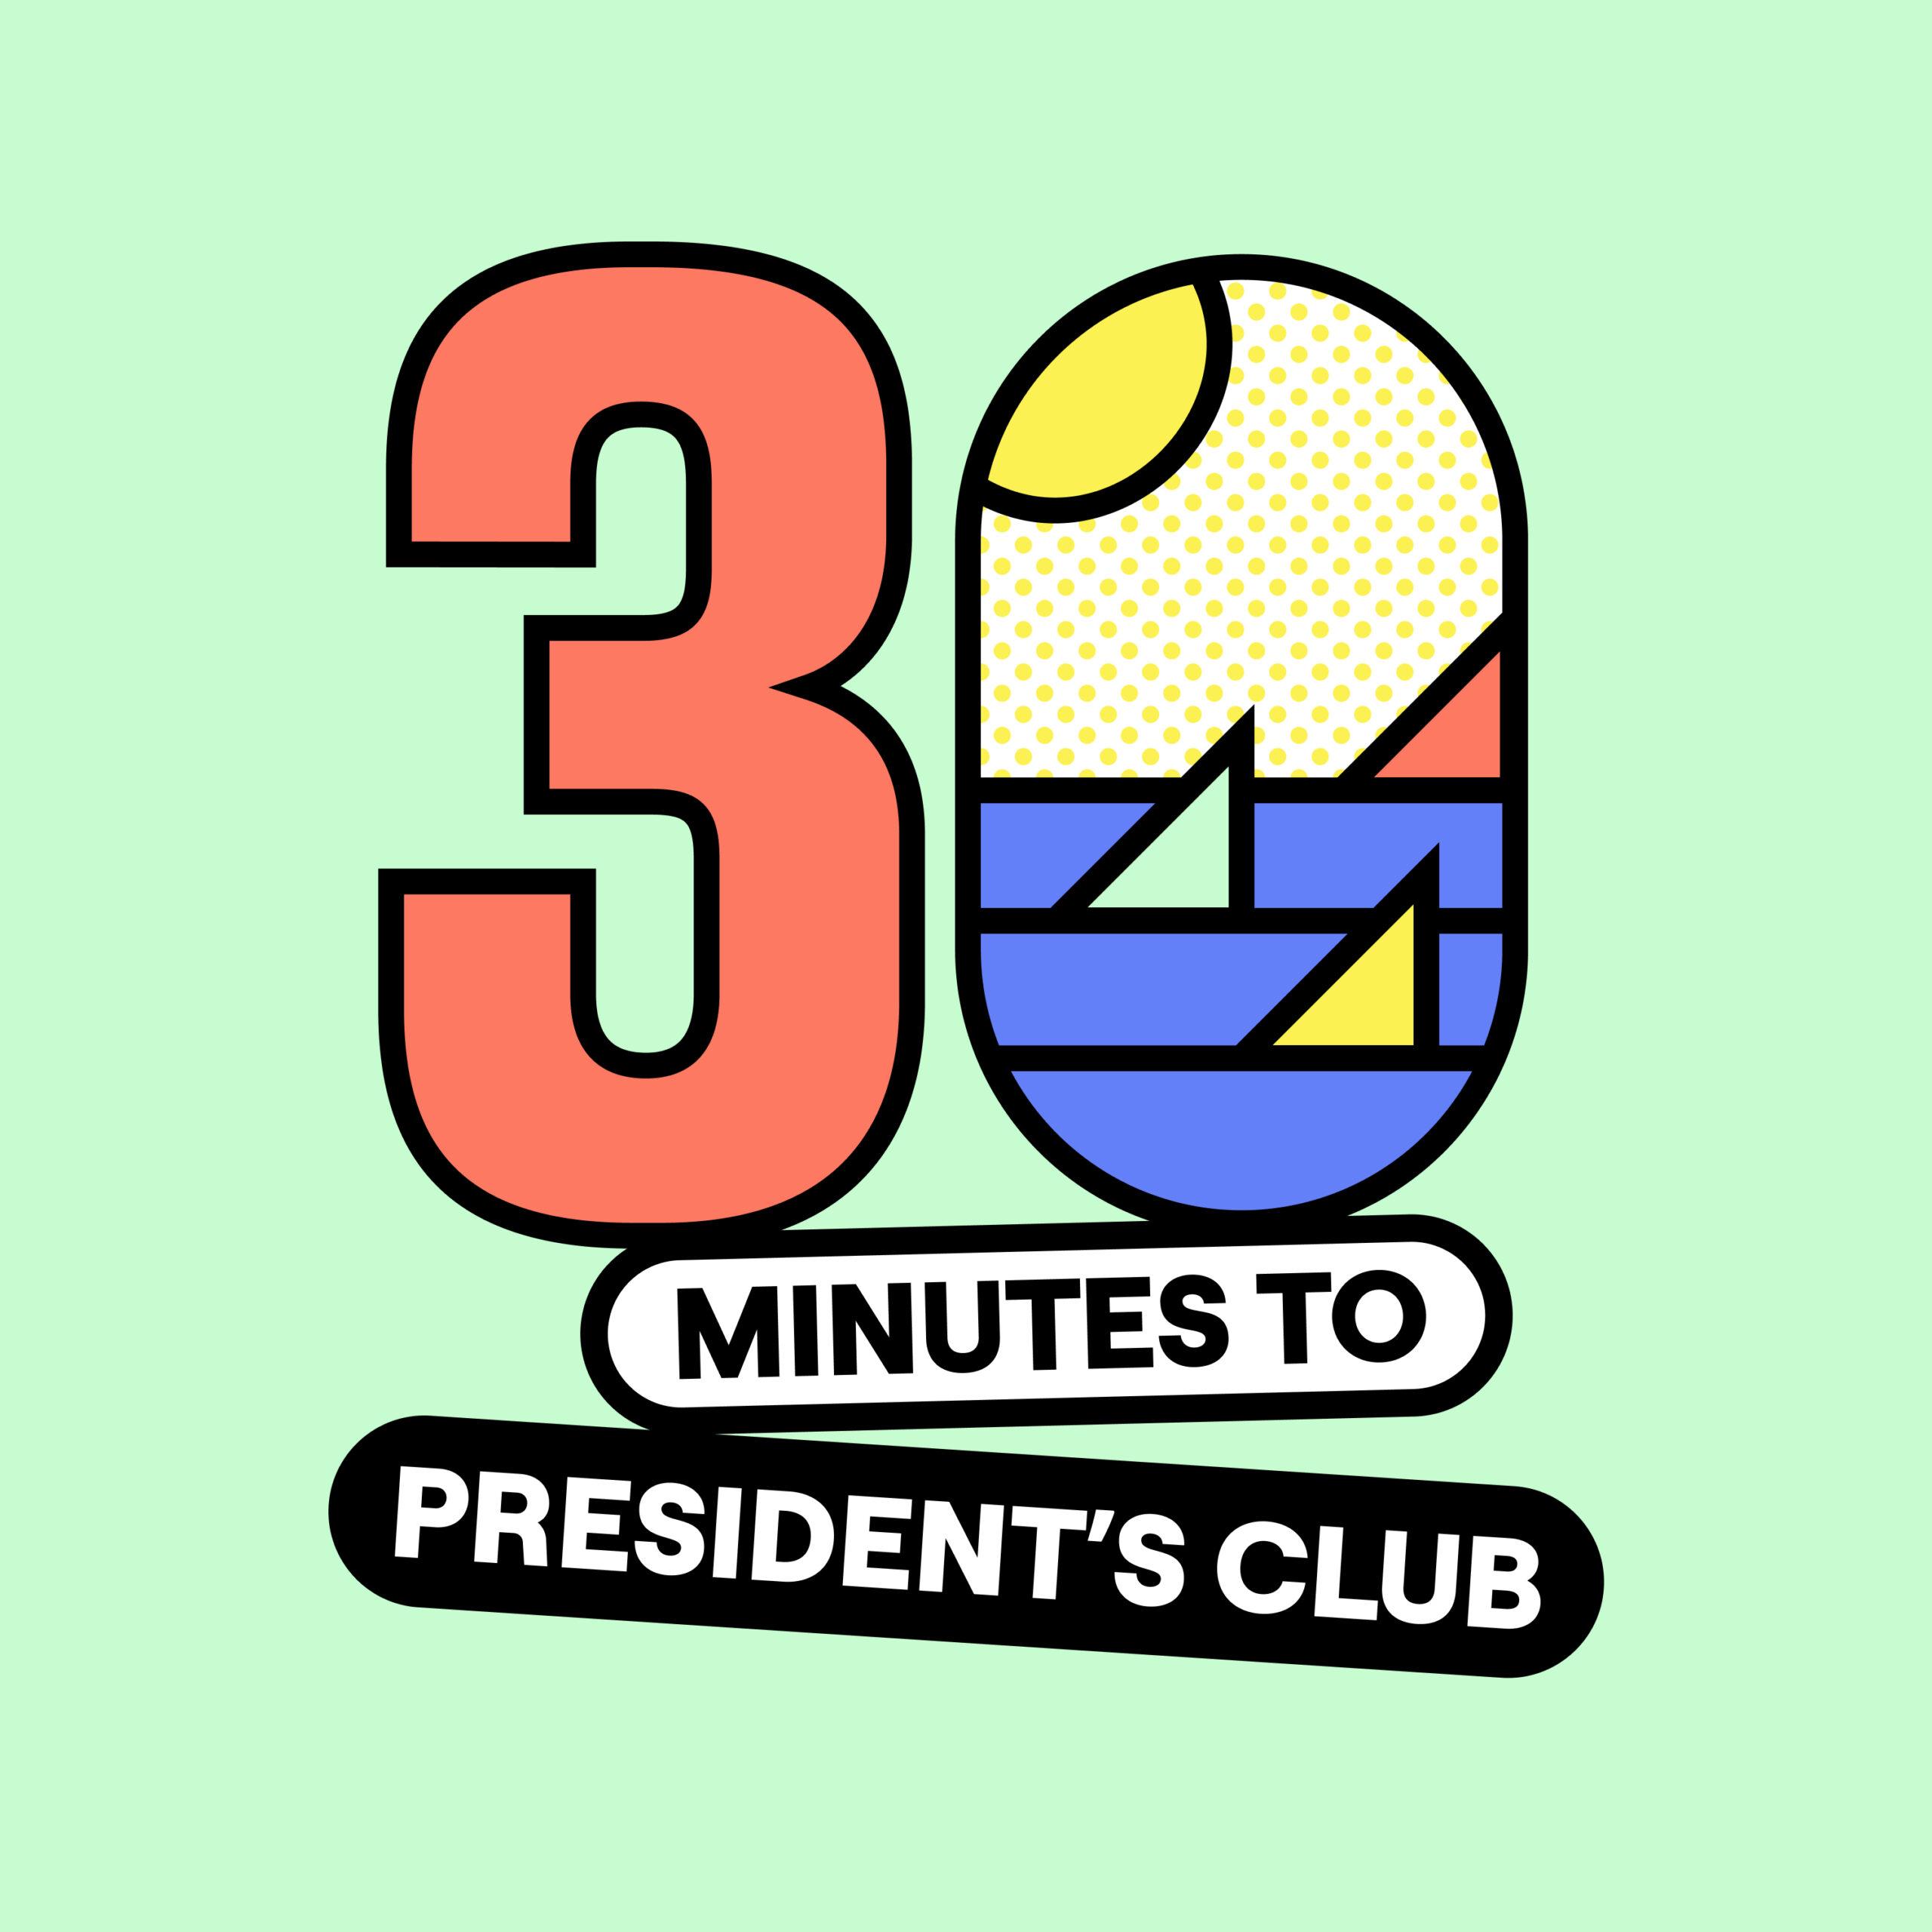 "30 minutes to President's Club"